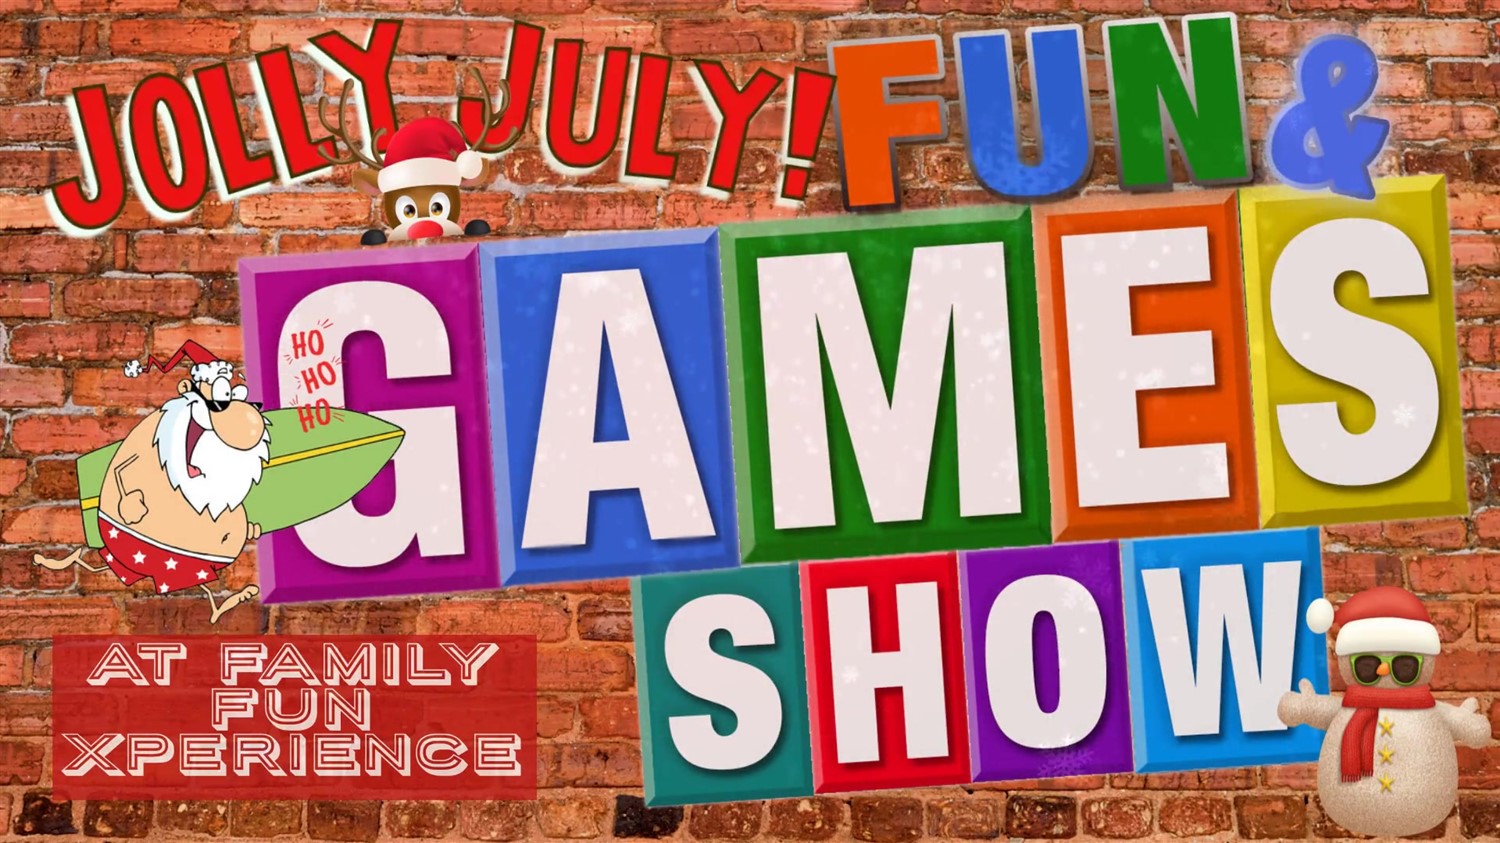 JOLLY JULY Fun & Games Show! Including a visit from SANTA! on Jul 22, 19:00@FFX Theatre - Pick a seat, Buy tickets and Get information on Family Fun Xperience tickets.ffxshow.org